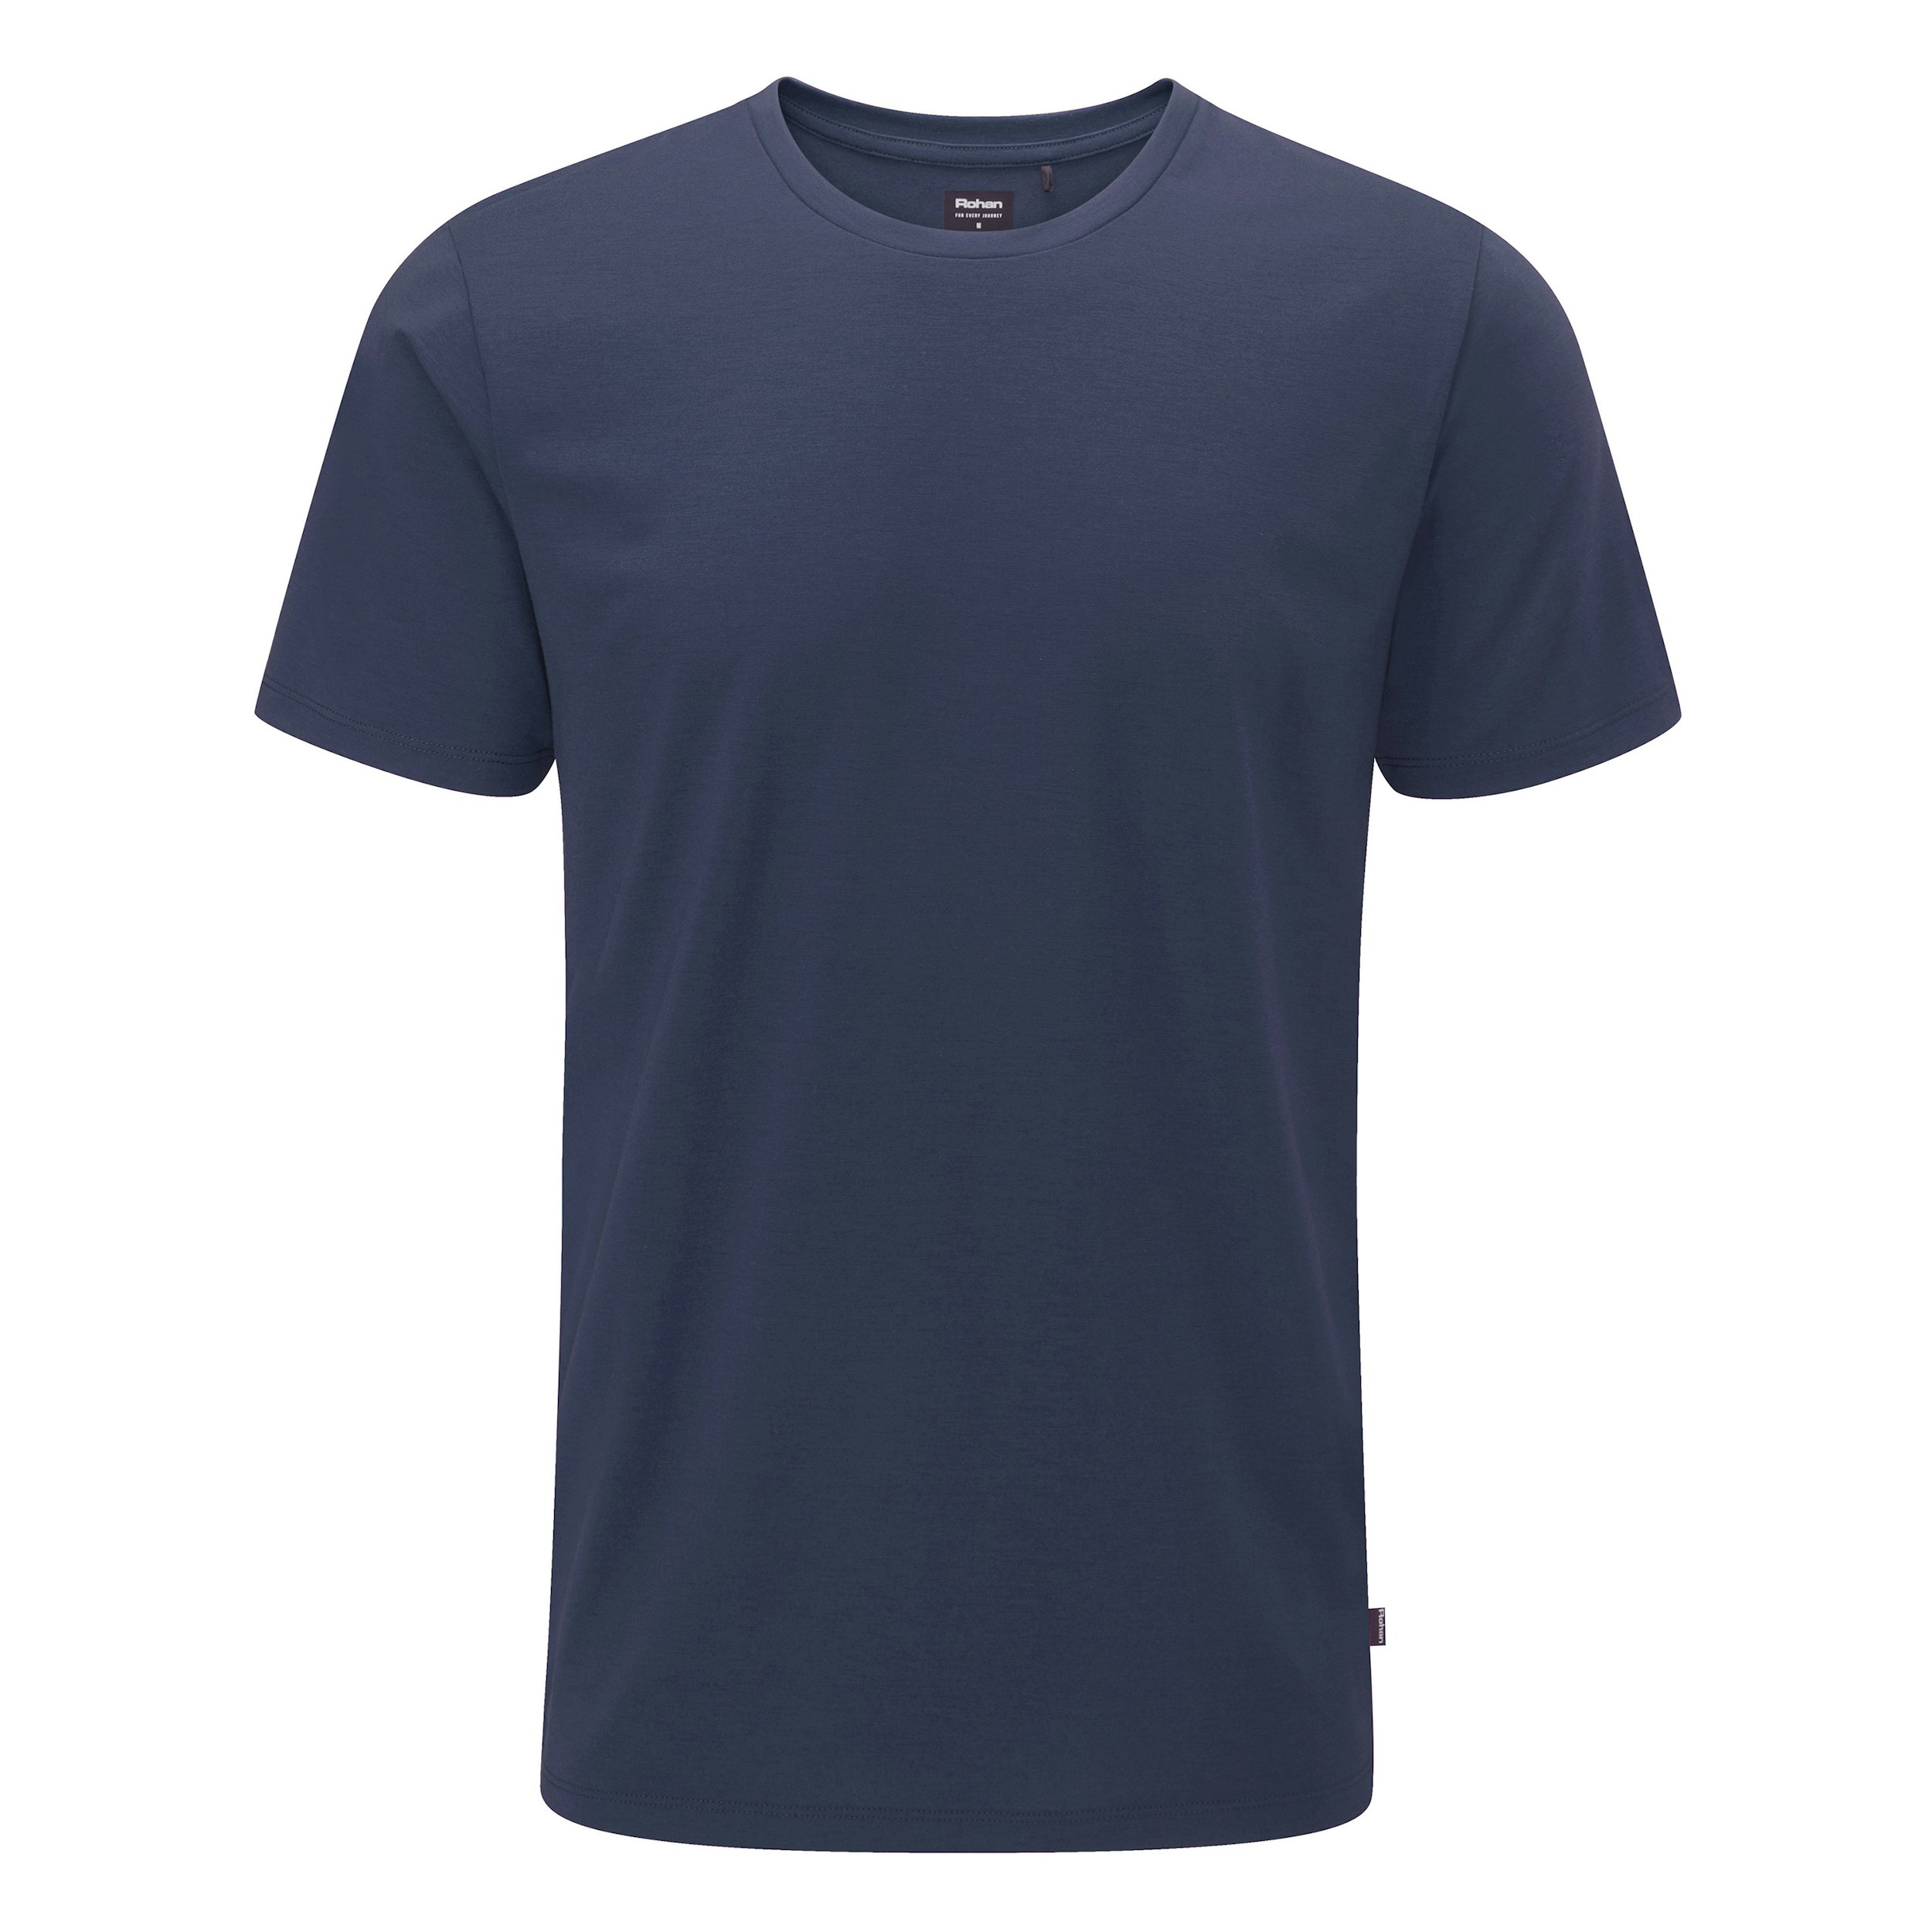 Global - High-wicking, antimicrobial T that doubles as a base layer.